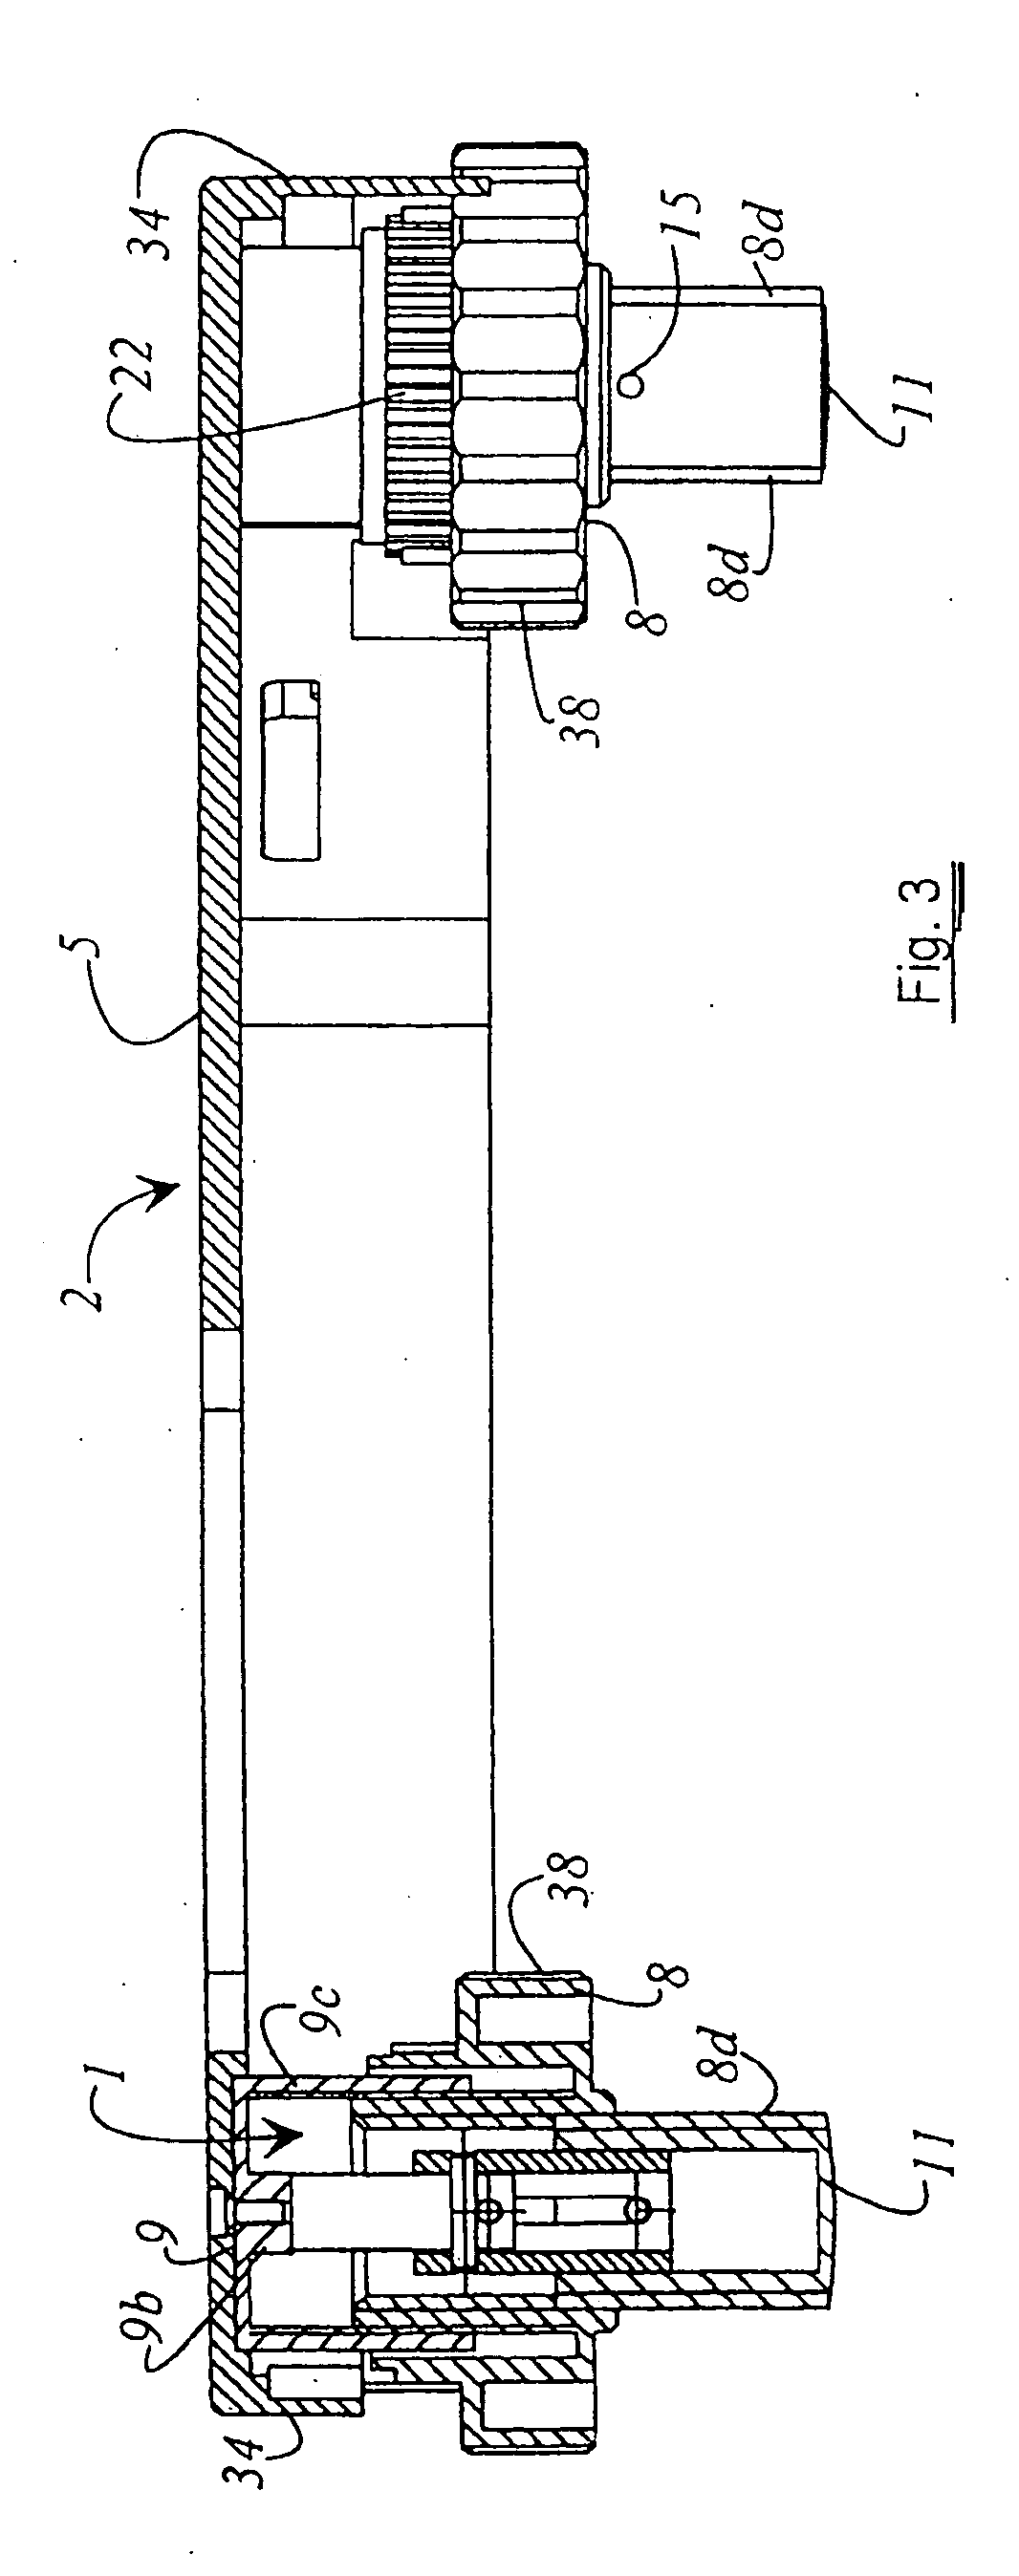 Height-adjusting device and support for optical systems, which comprises height-adjusting devices